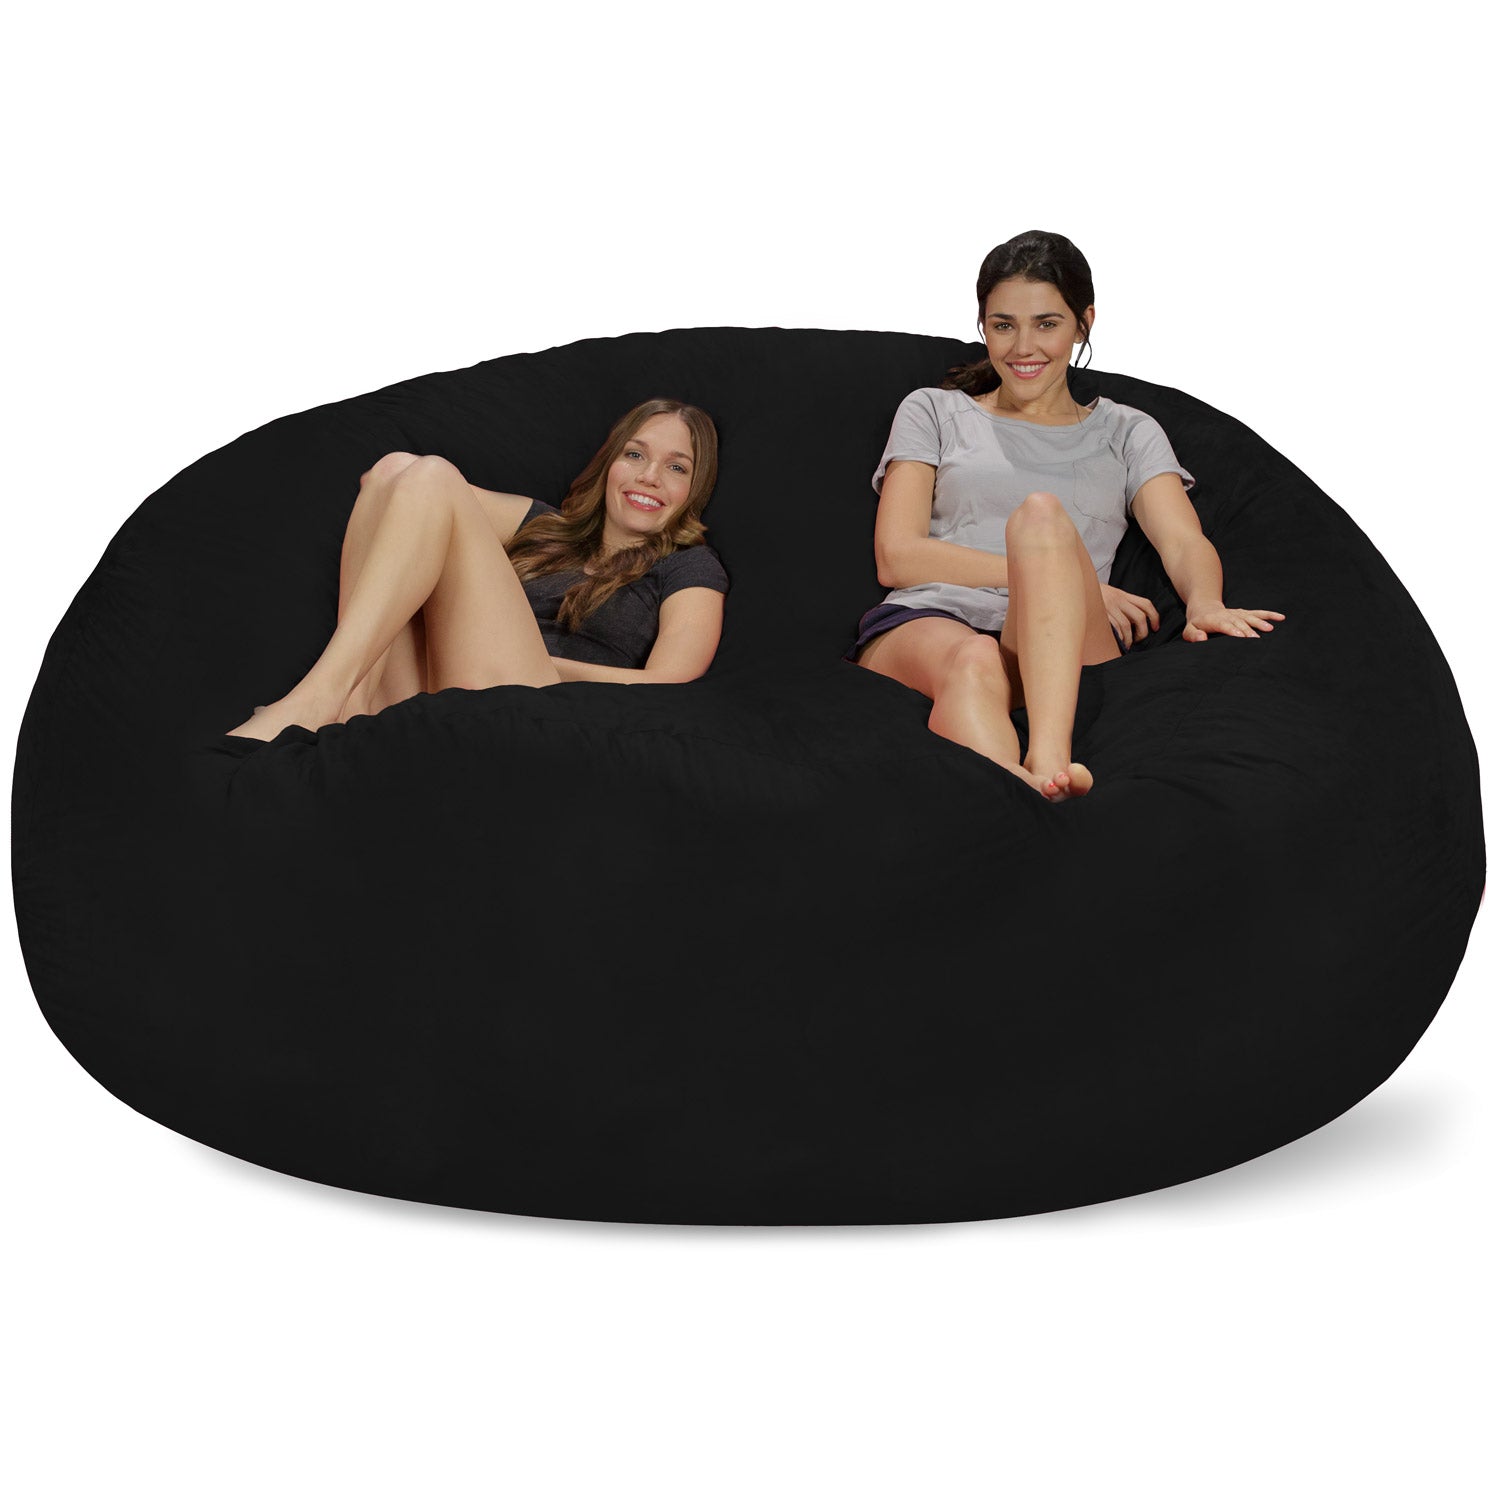 Chill Sack Bean Bag Chair, Memory Foam Lounger with Micorsuede Cover, Kids,  Adults, 5 ft, Charcoal